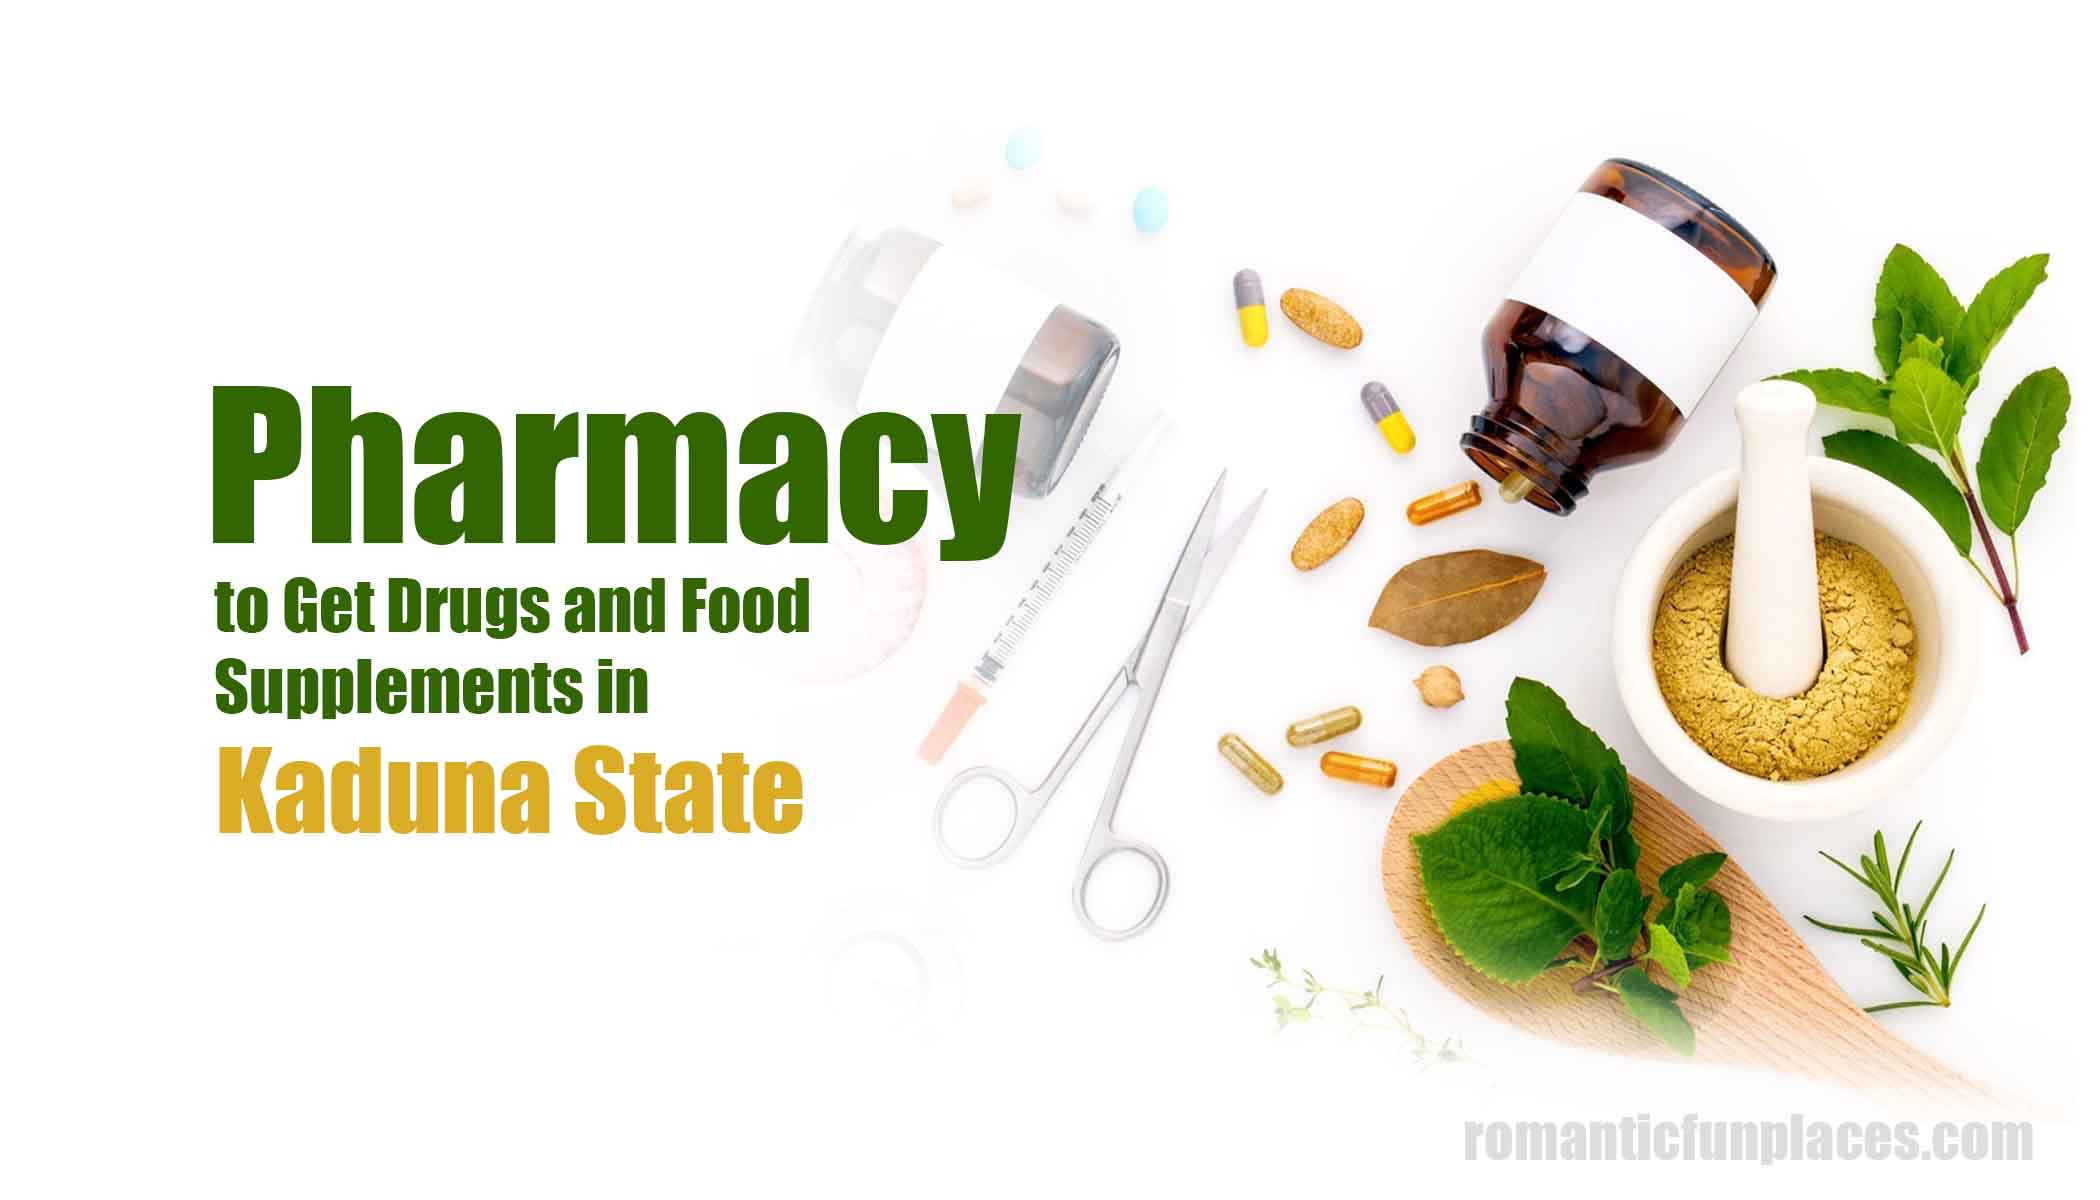 Pharmacy to Get Drugs and Food Supplements in Kaduna State